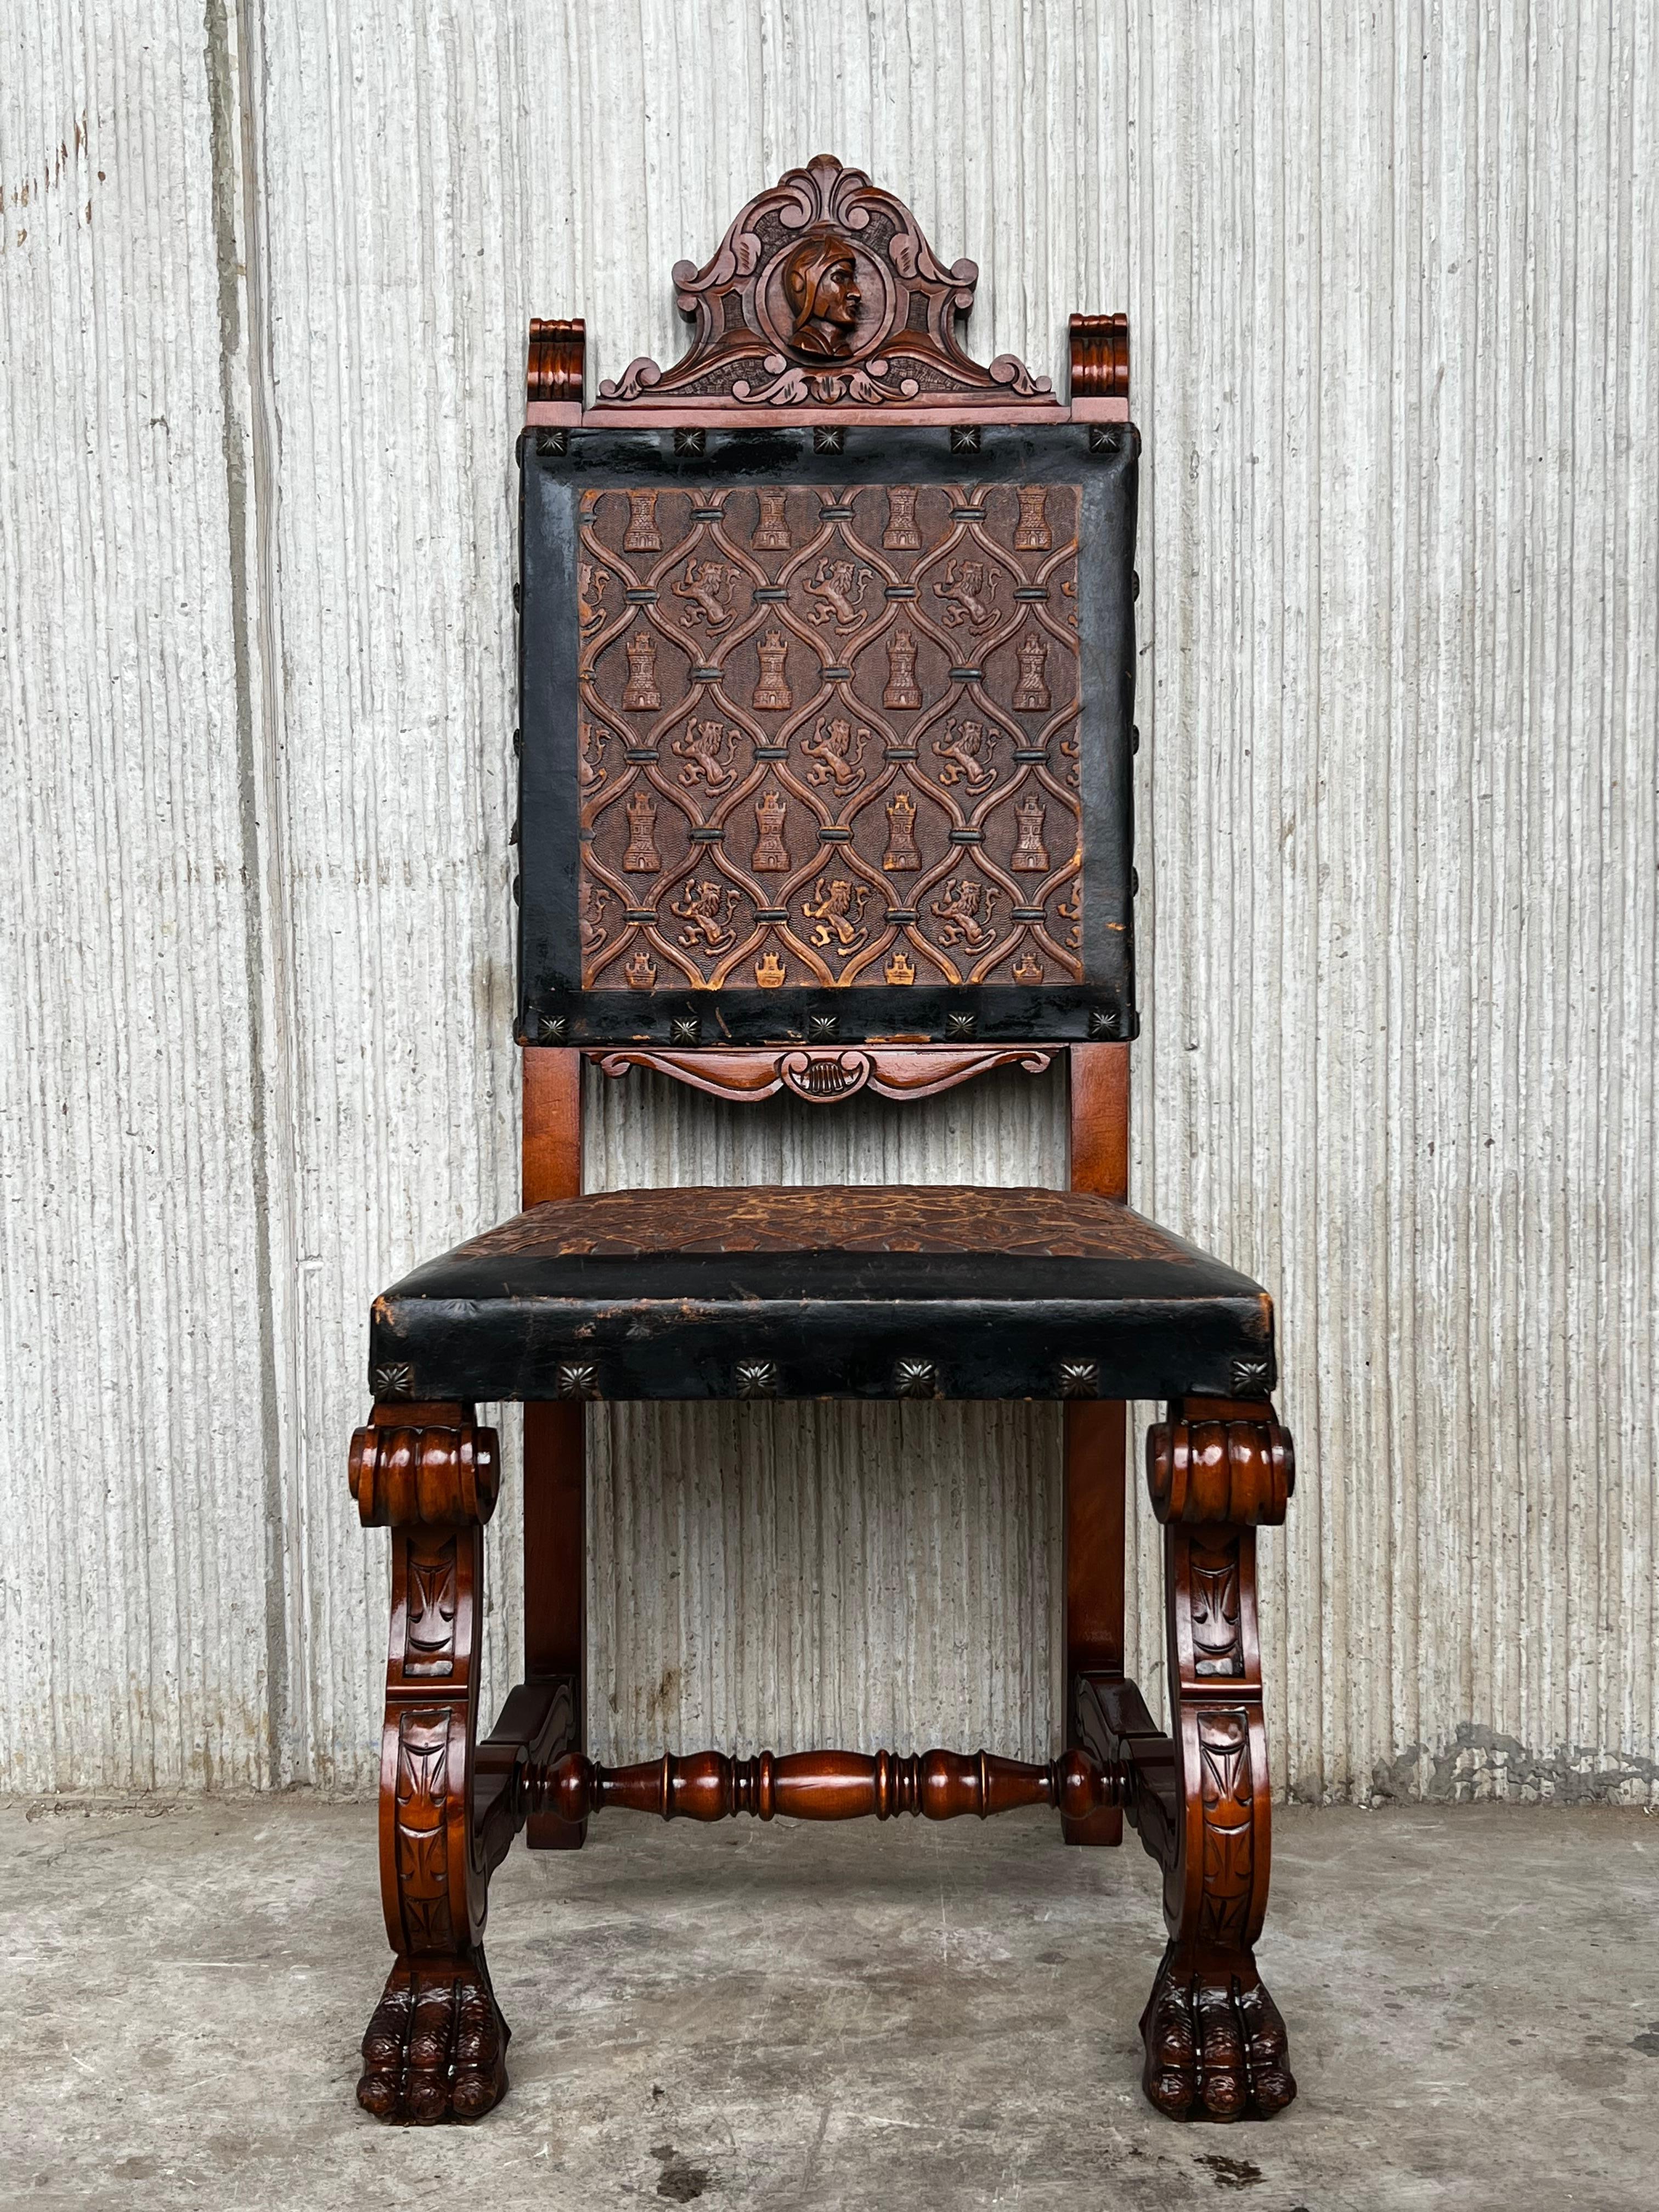 A set of 6 Spanish chairs with leather sling seatsand backs on oak and sycamore frames with hand carved decoration. These chairs are true to the Baroque Spanish character and each features carvings that employ typical Spanish elements with paw feet